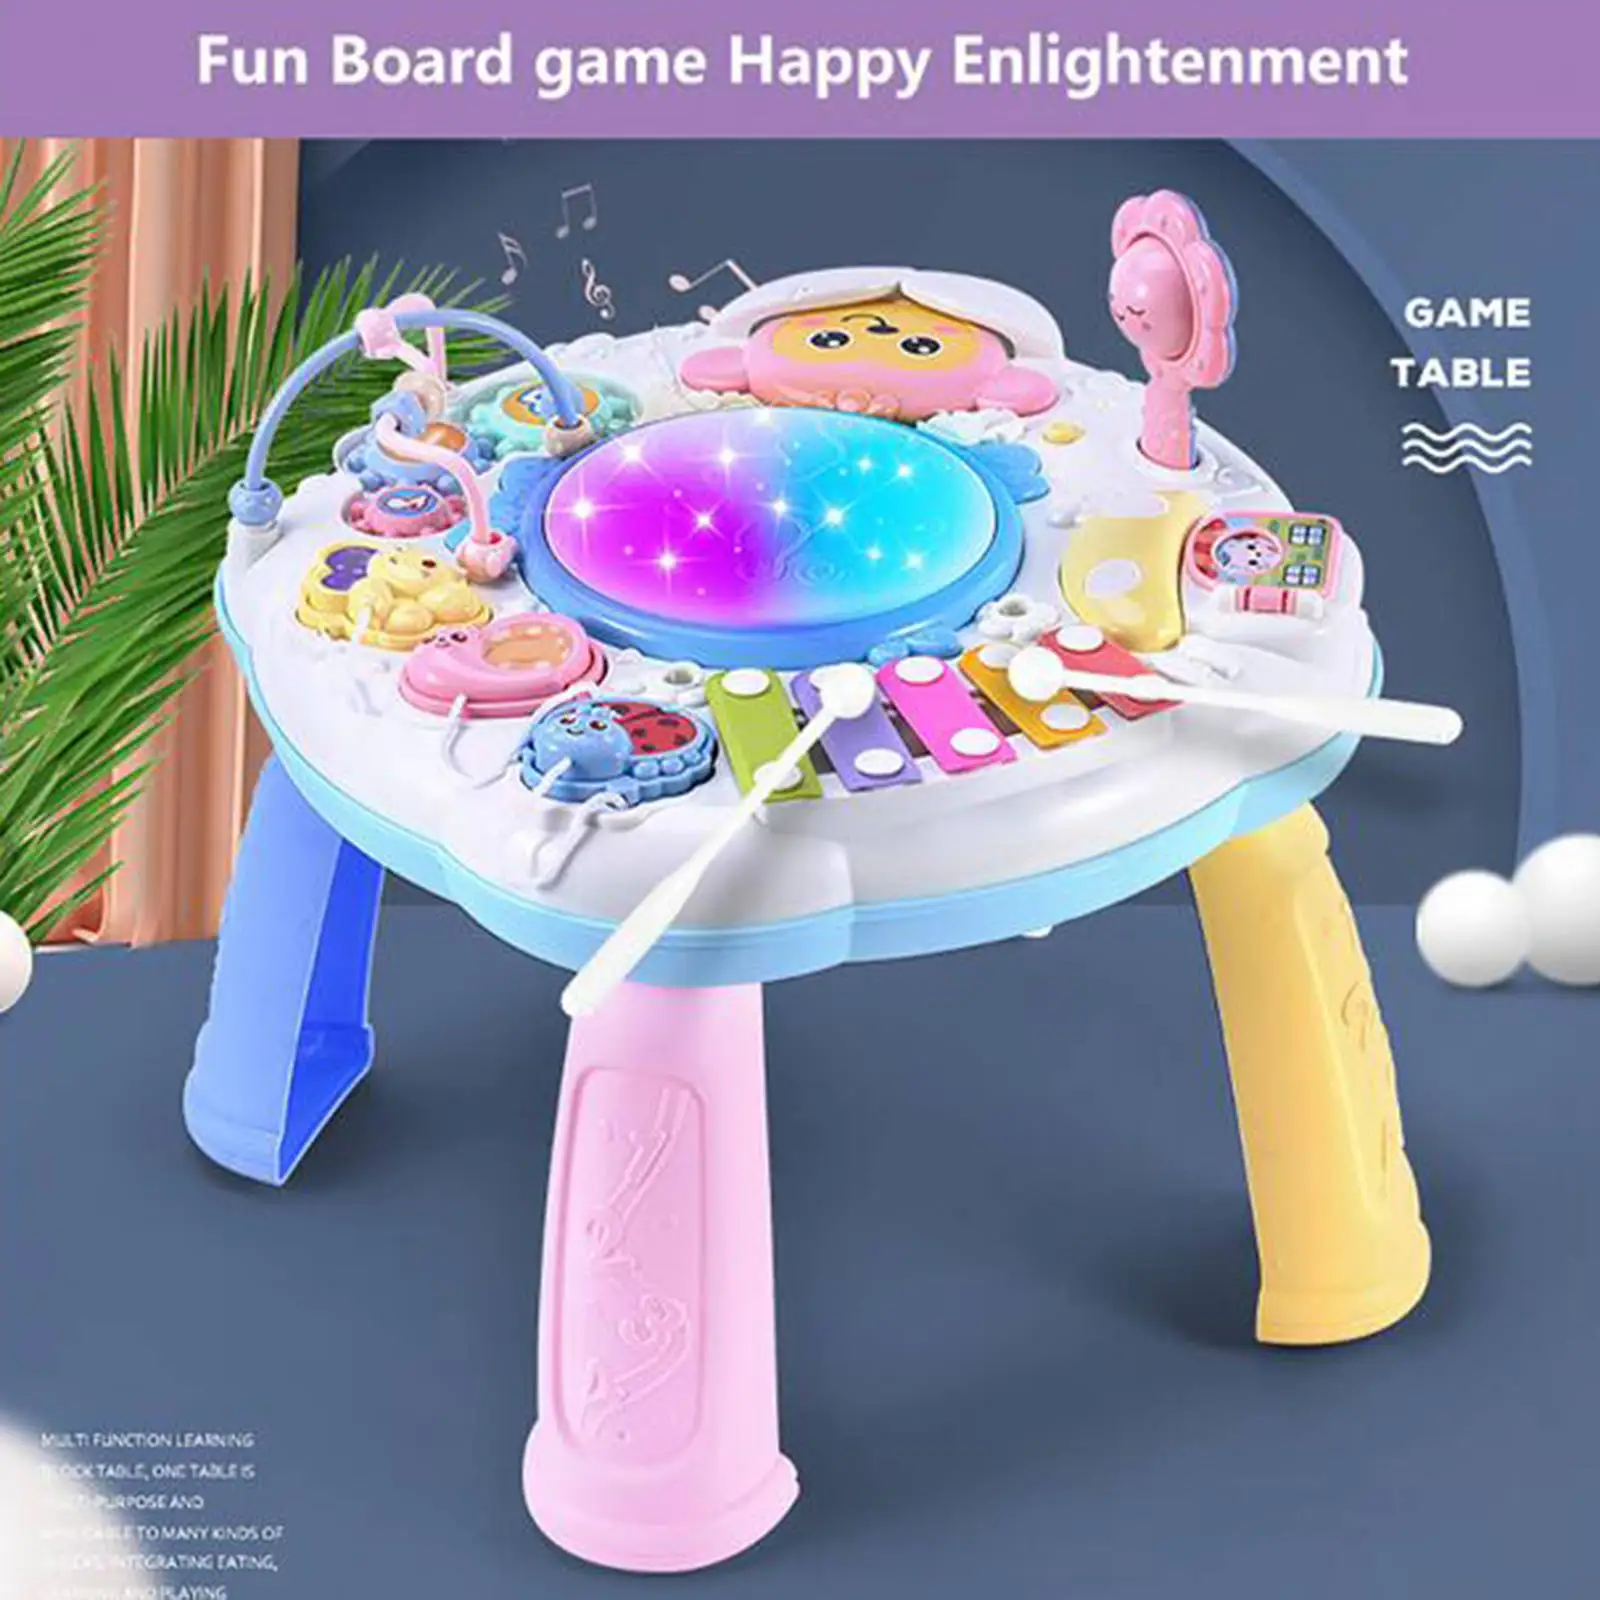 Infants Musical Instrument Learning Table Baby Early Educational Kids Study Activity Center Music Puzzle Game Piano Drums Toys